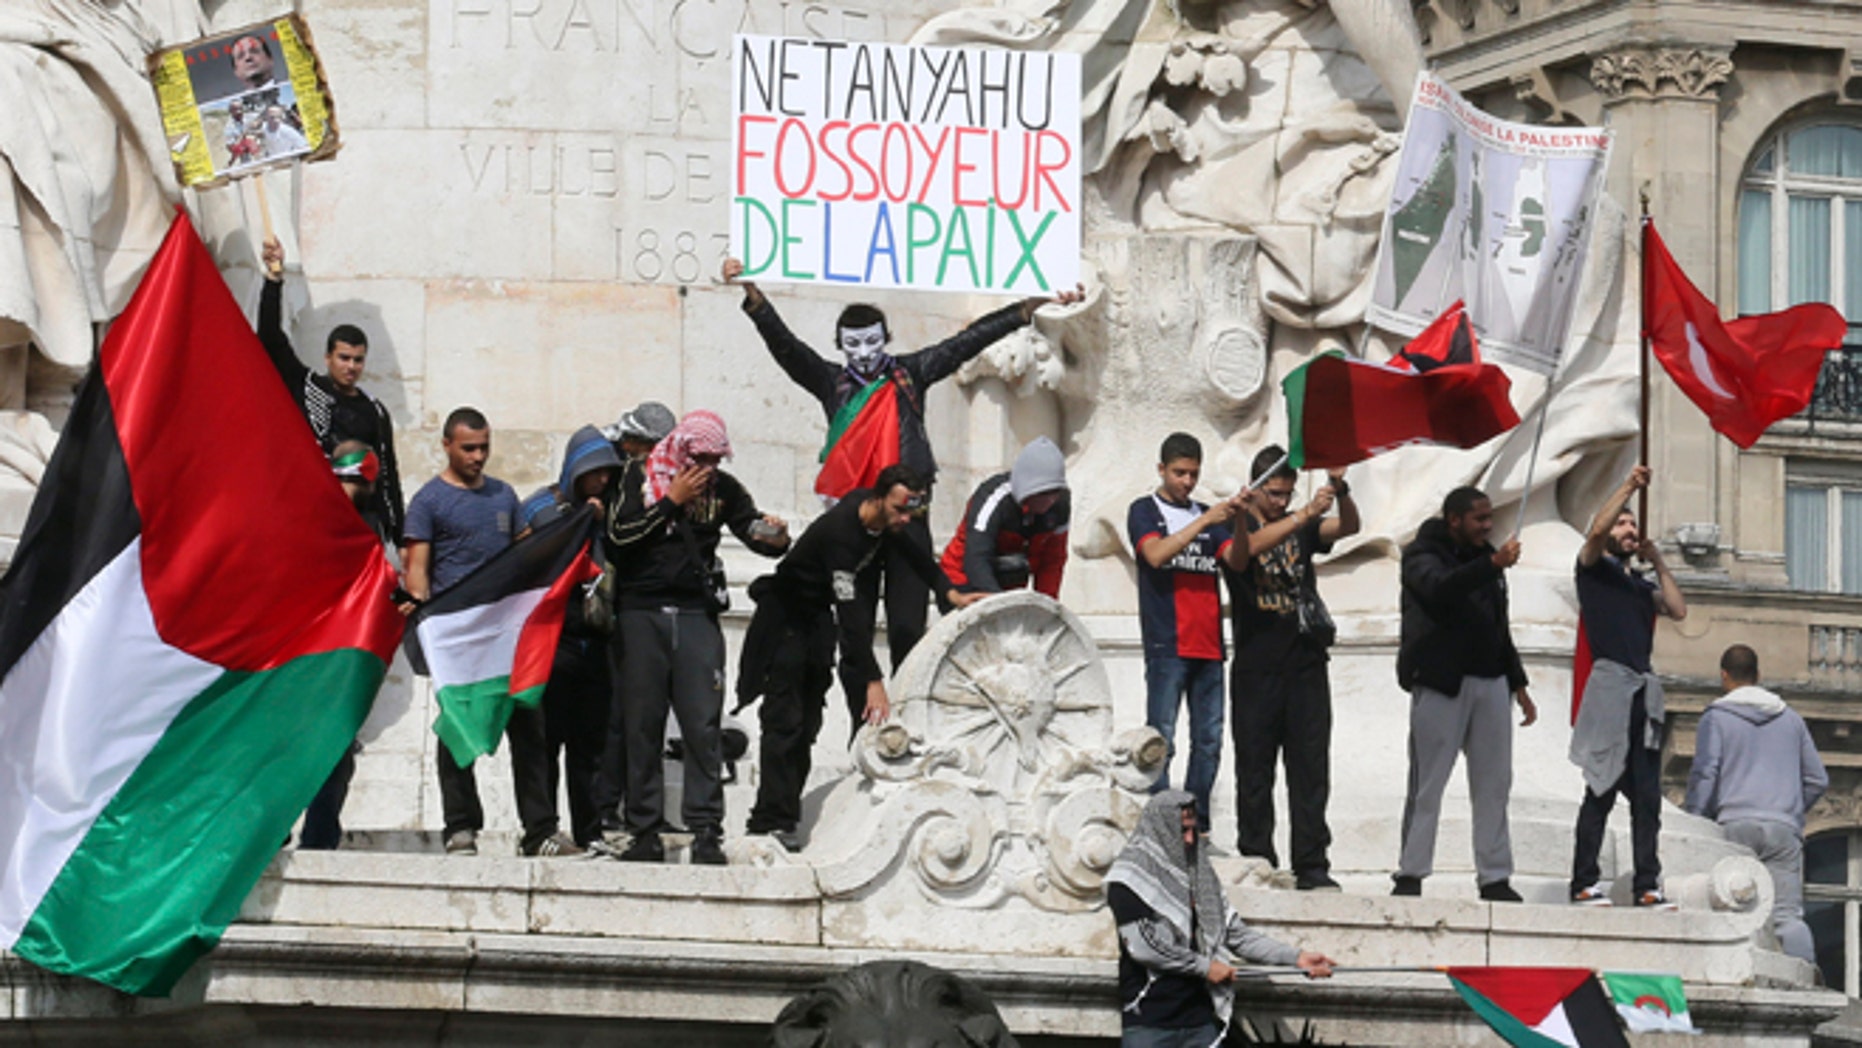 Pro-Palestinian protesters try to enter Paris synagogues, scuffle with ...